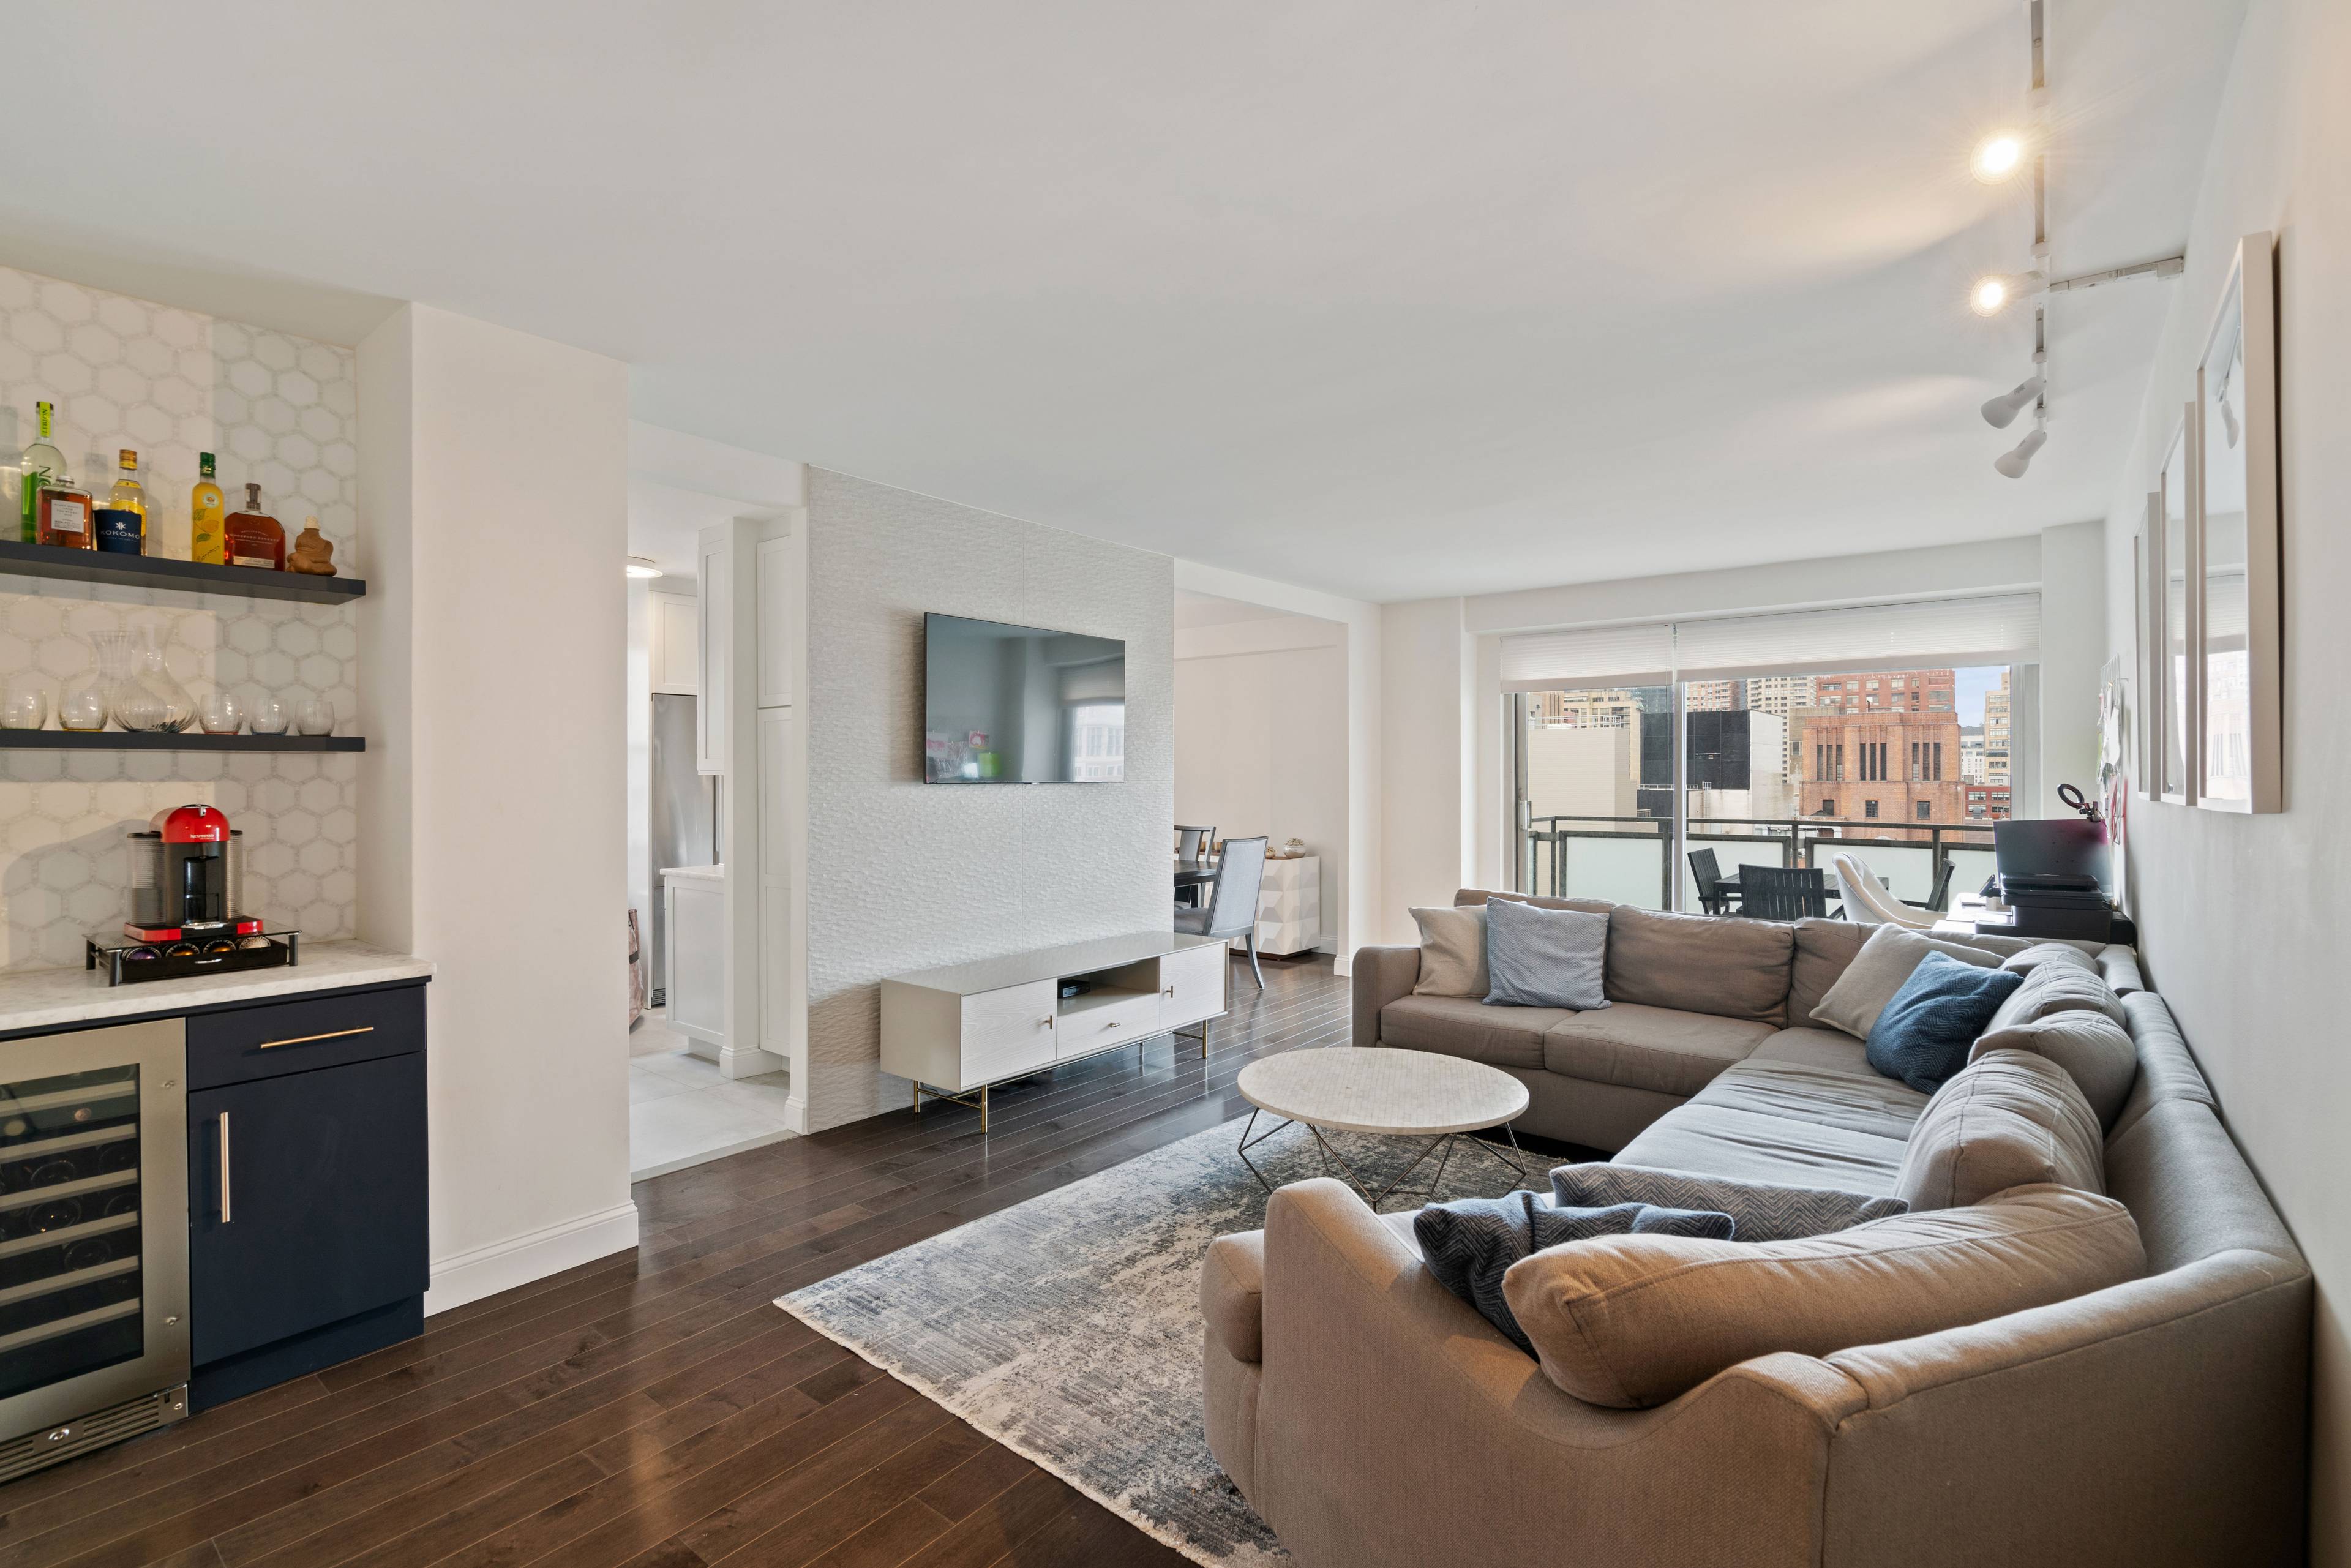 BRAND NEW 2 BED 2 BATH WITH VIEWS, LIGHT, SPACE, CLOSETS & AMENITIES